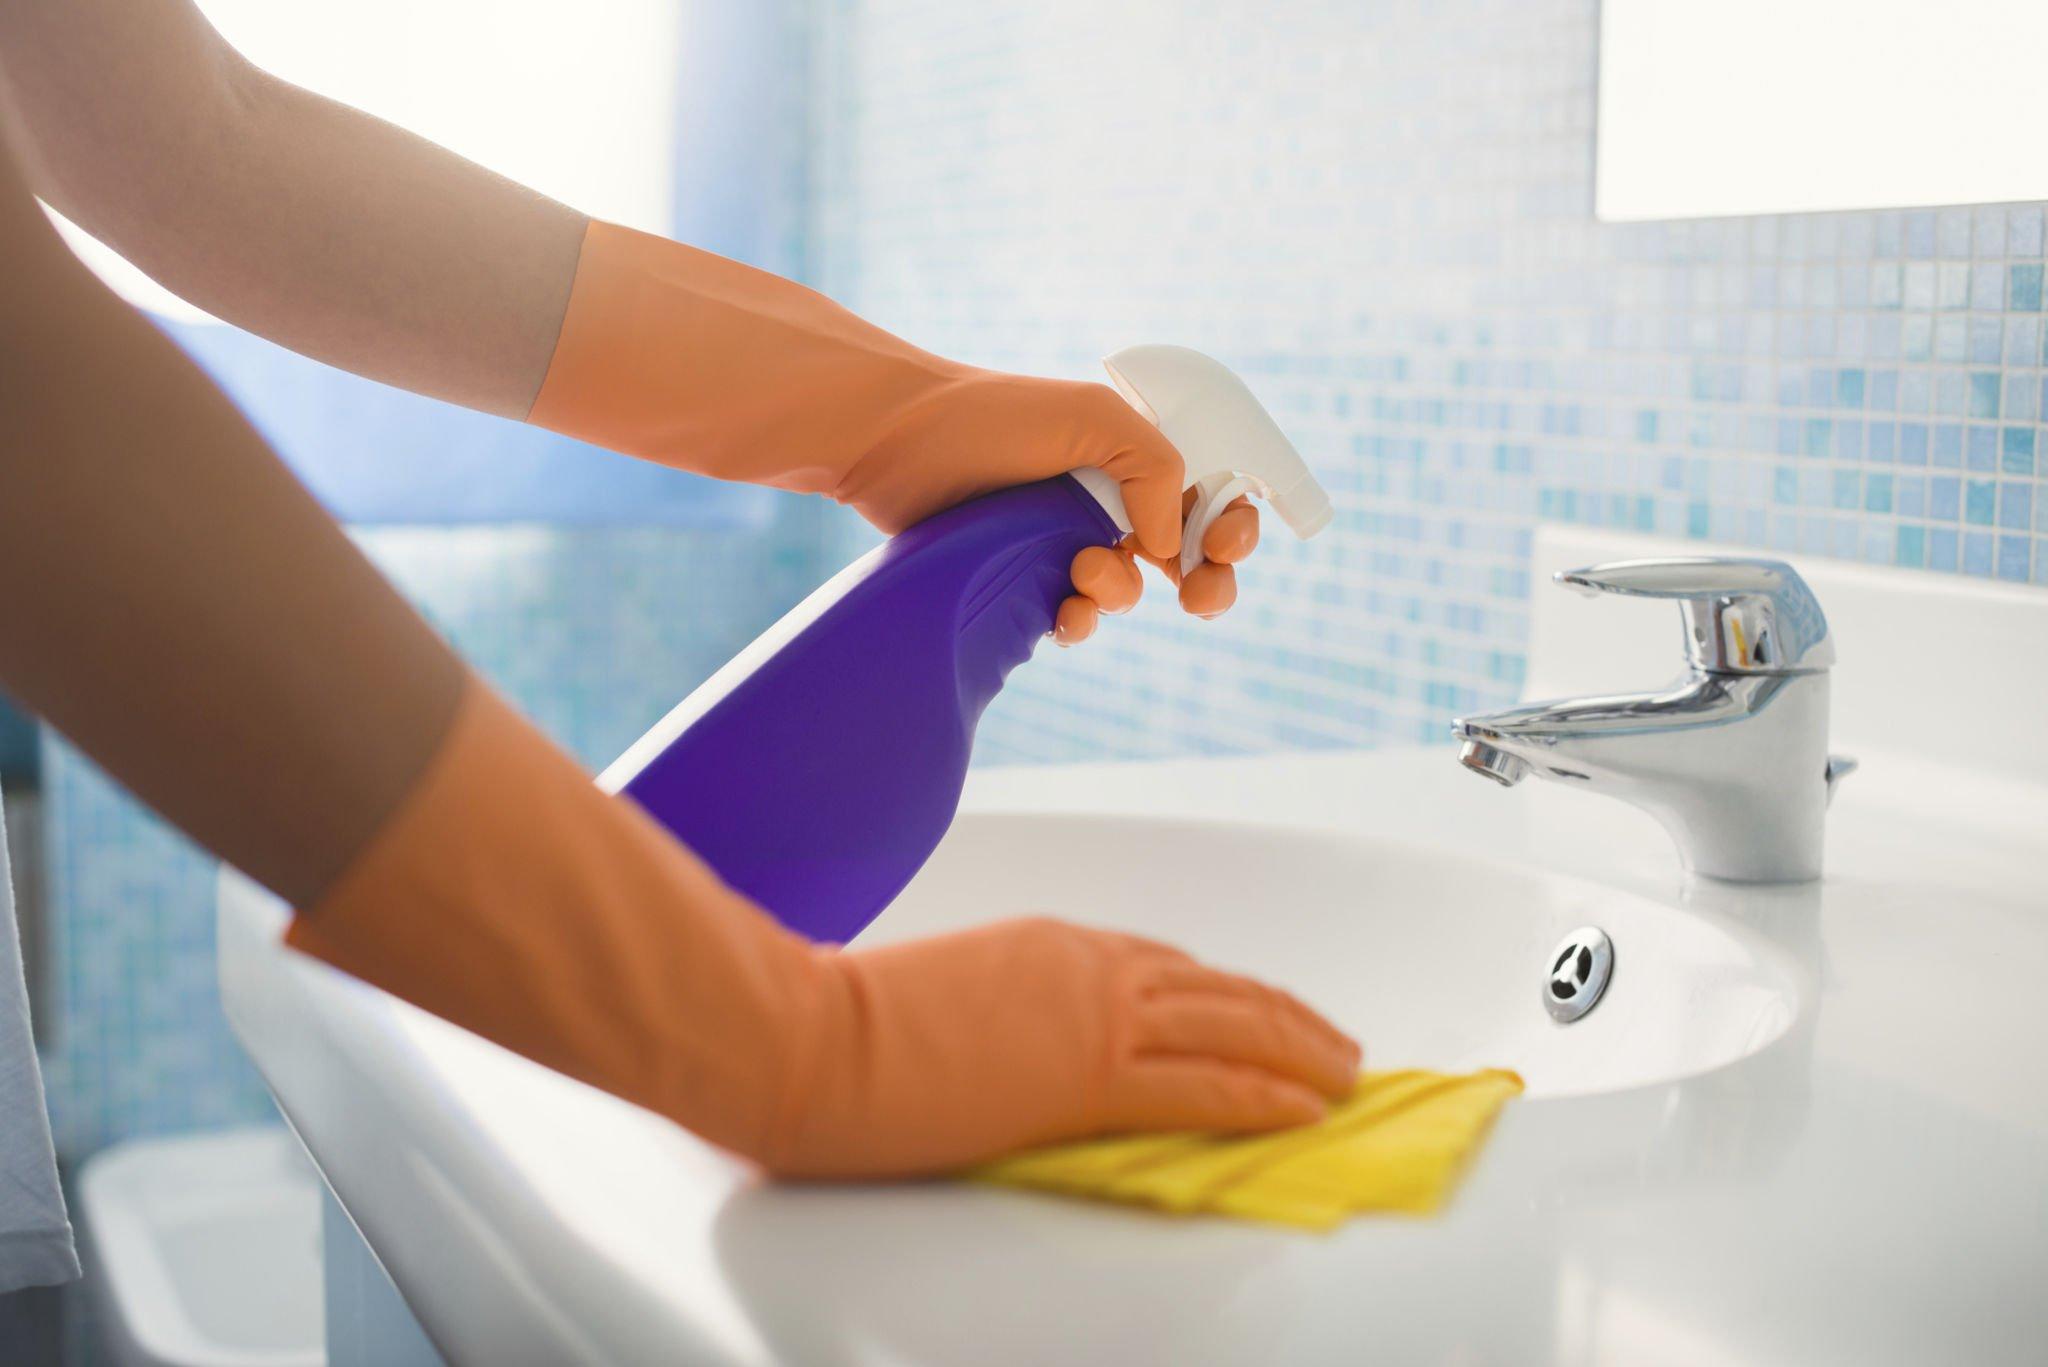 5 Bathroom Cleaning Hacks to Make Your Life Easier